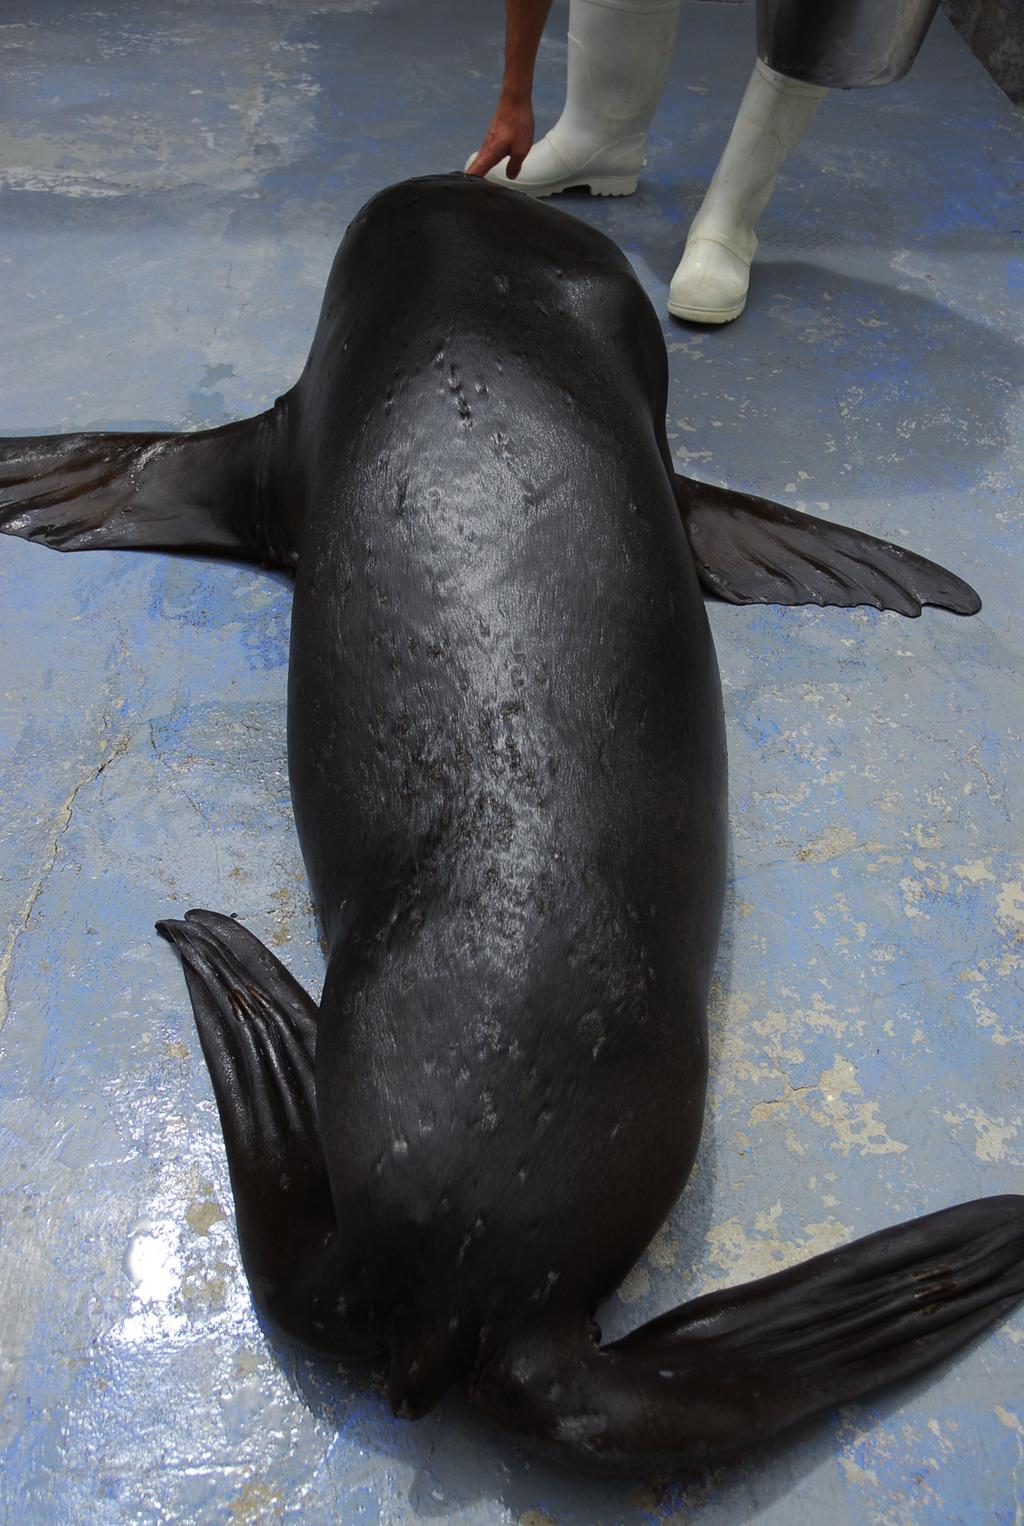 Two months later, the animal showed evident recovery, with almost complete healing of the lesions (Figure 3).